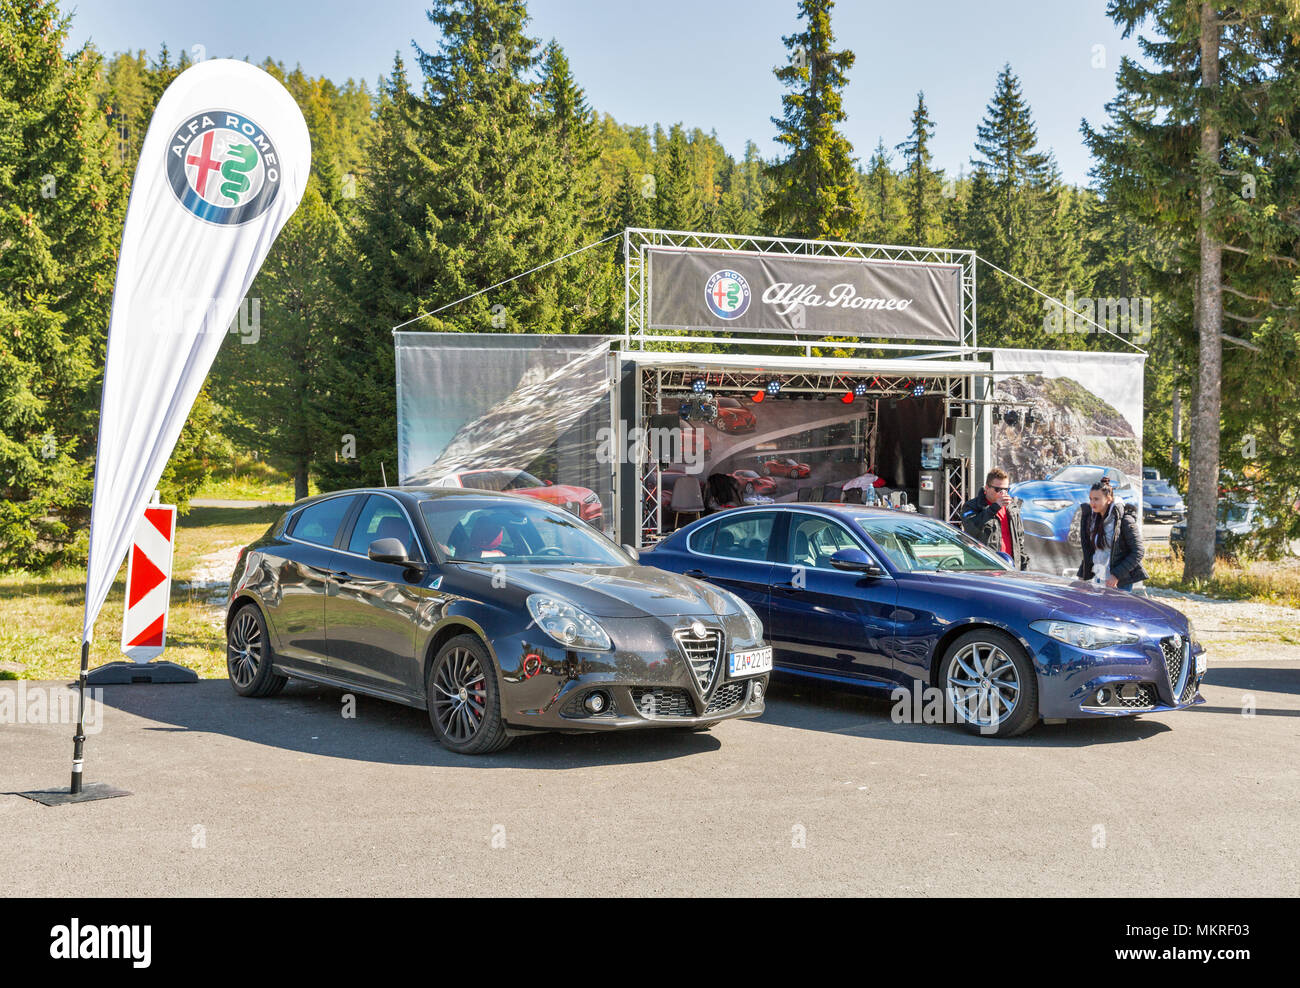 STRBSKE PLESO, SLOVAKIA - OCTOBER 01, 2017: People visit Alfa Romeo advertising stand. It is Italian car manufacturer known for sporty vehicles, a sub Stock Photo